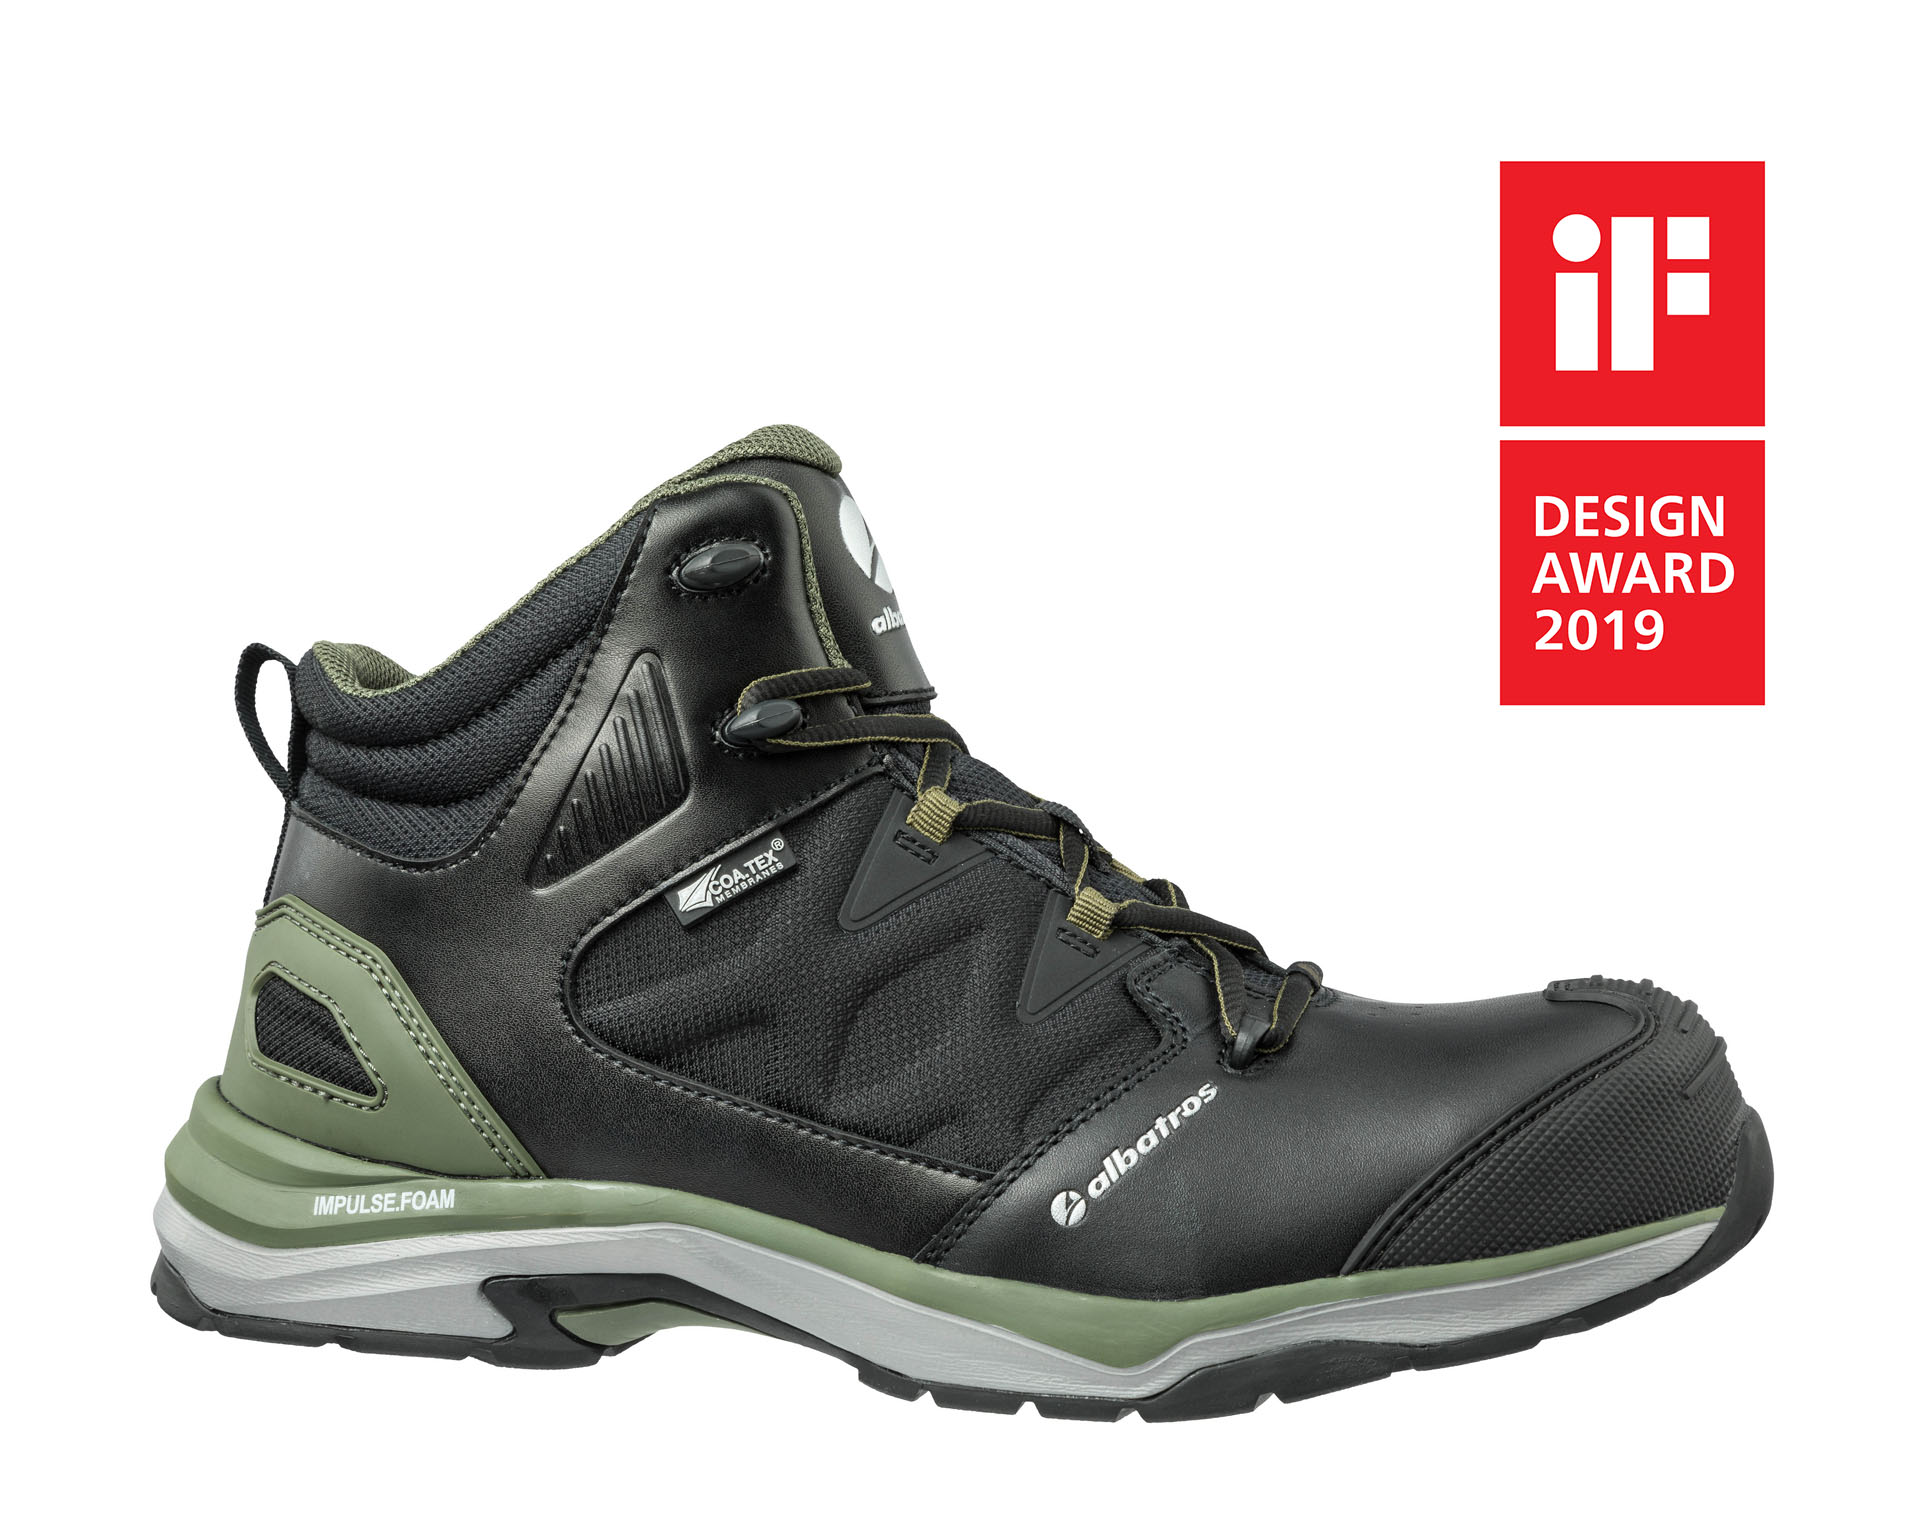 Albatros Ultratrail CTX Mid S3 olive green composite toe/midsole safety trainer 